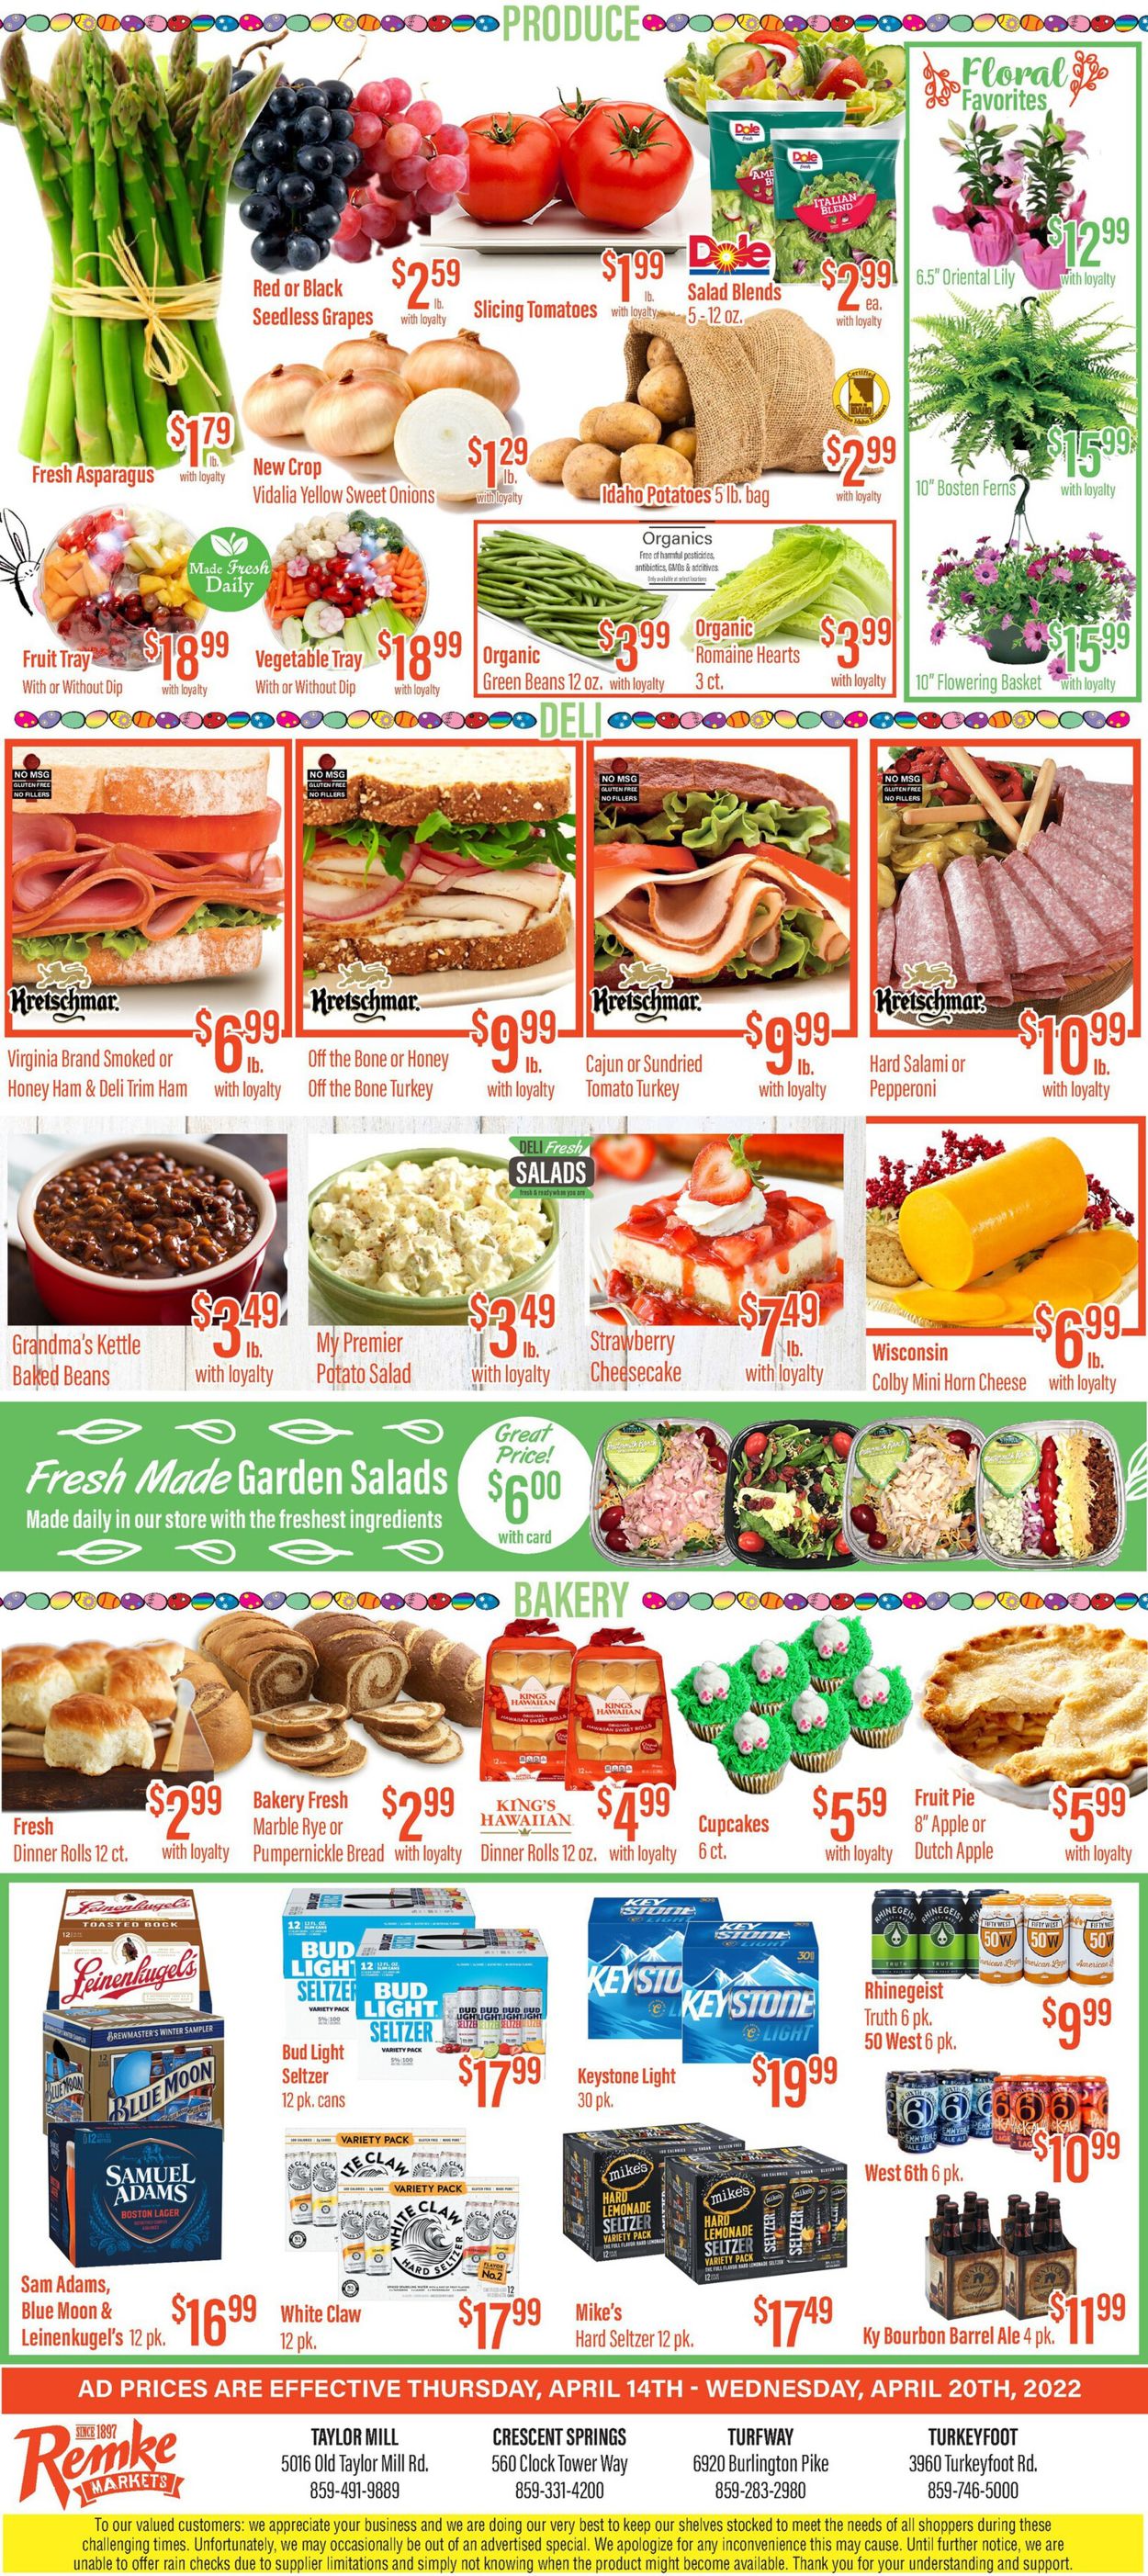 Remke Markets EASTER AD 2022 Weekly Ad Circular - valid 04/14-04/20/2022 (Page 5)